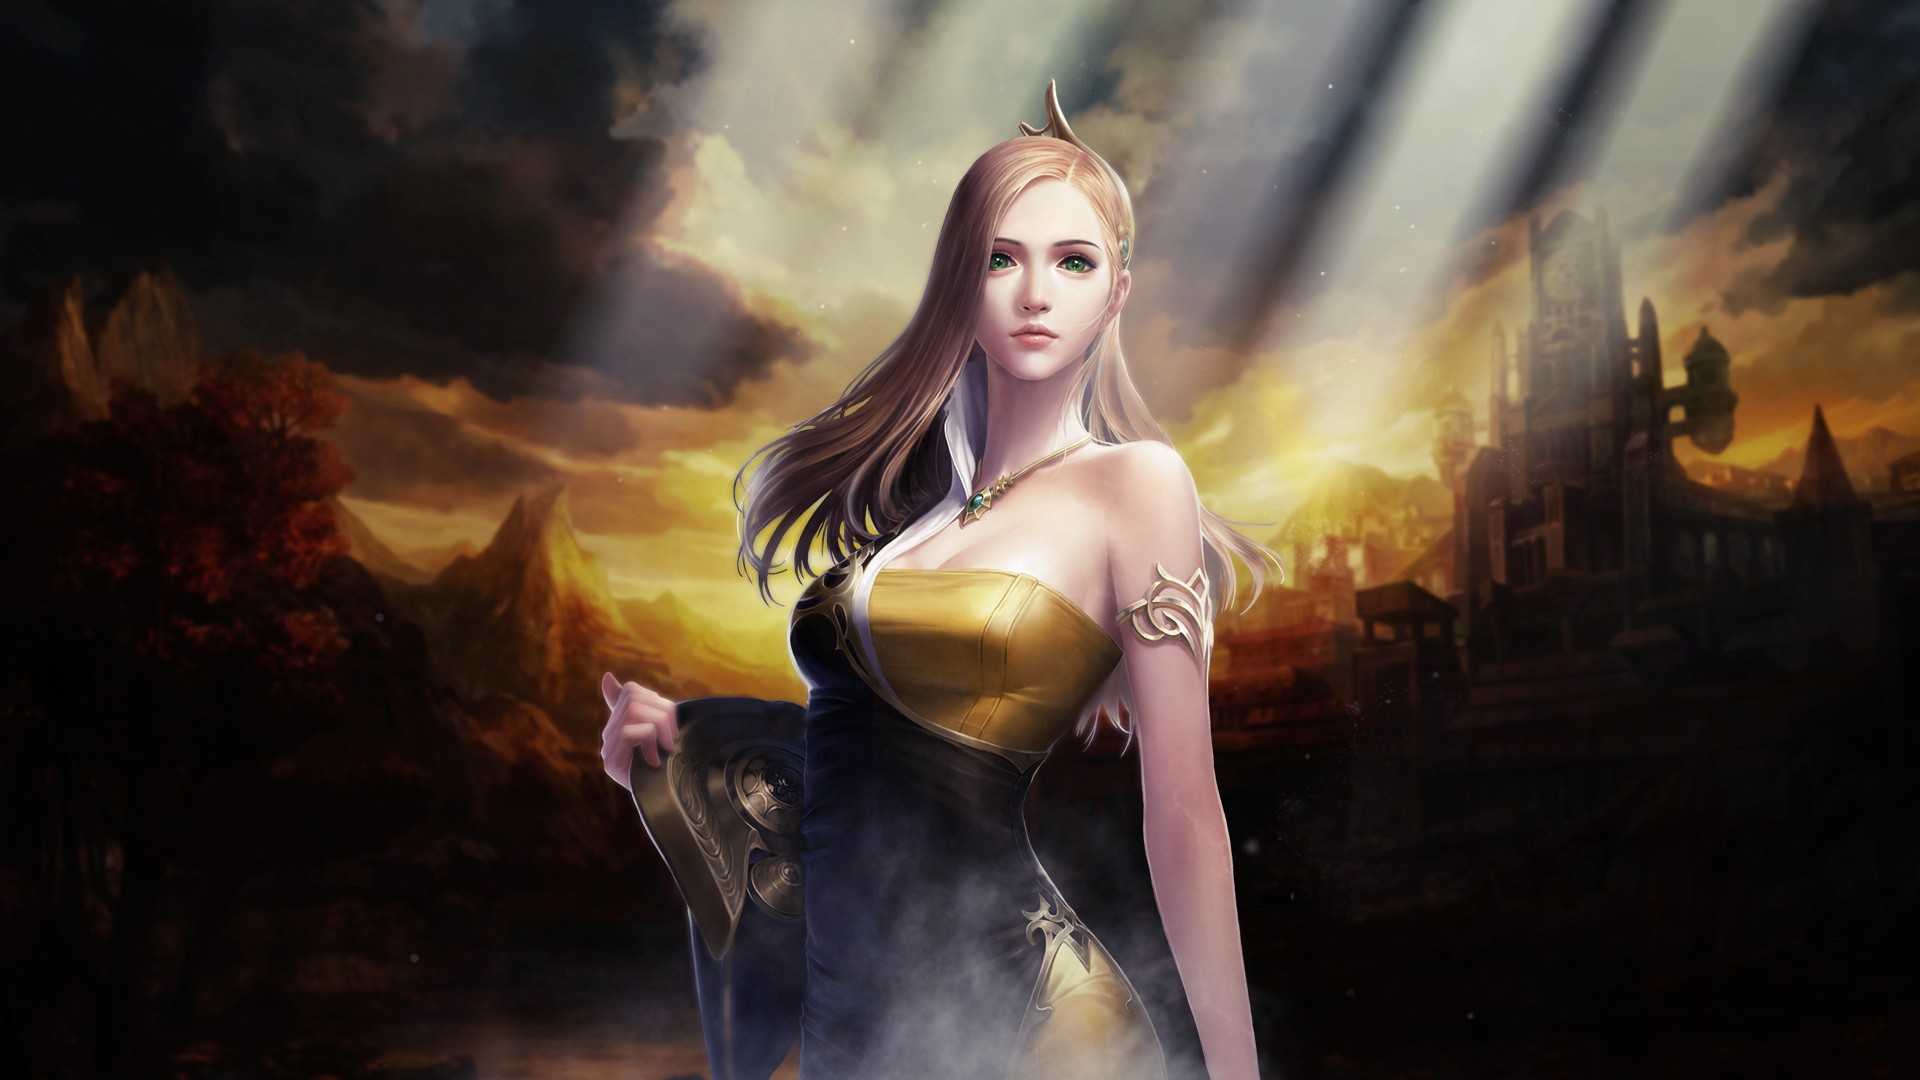 long hair, Blonde, Green eyes, Women, PC gaming, Video games, Mmorpg, Cabal, Cabal II, Dress, Castle, Mountains, Clouds, Sun rays, Necklace Wallpaper